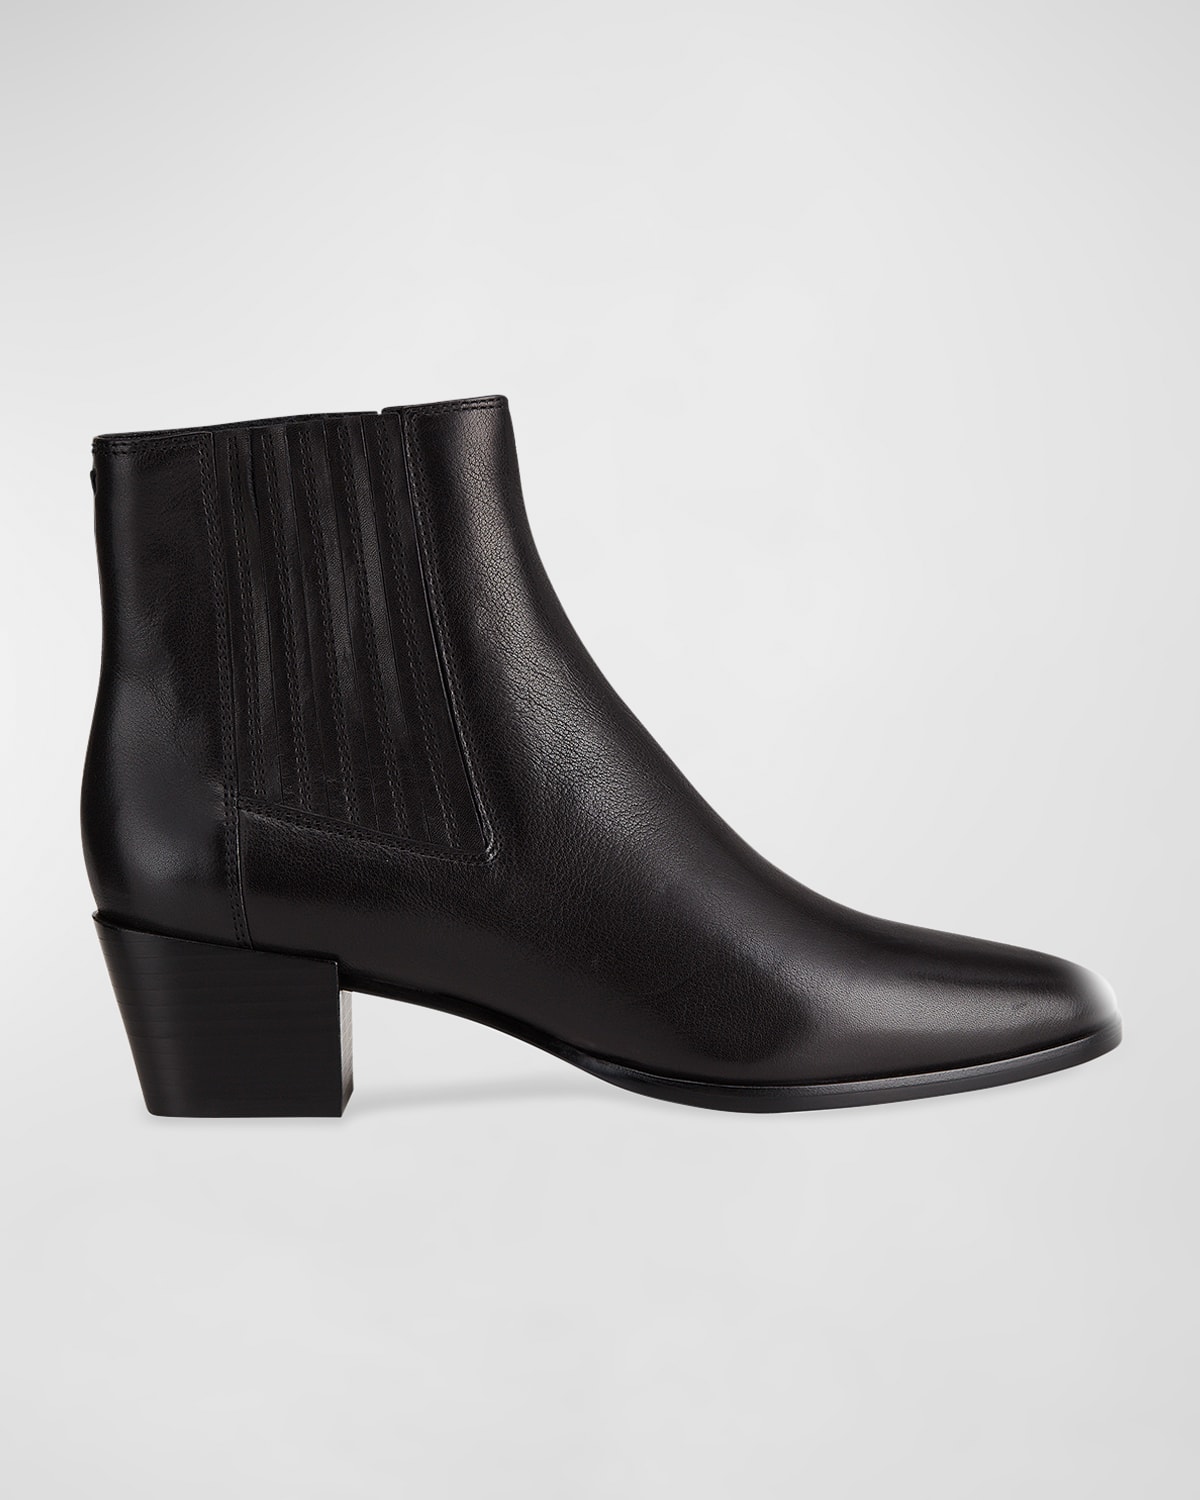 Rag & Bone Rover Leather Ankle Booties